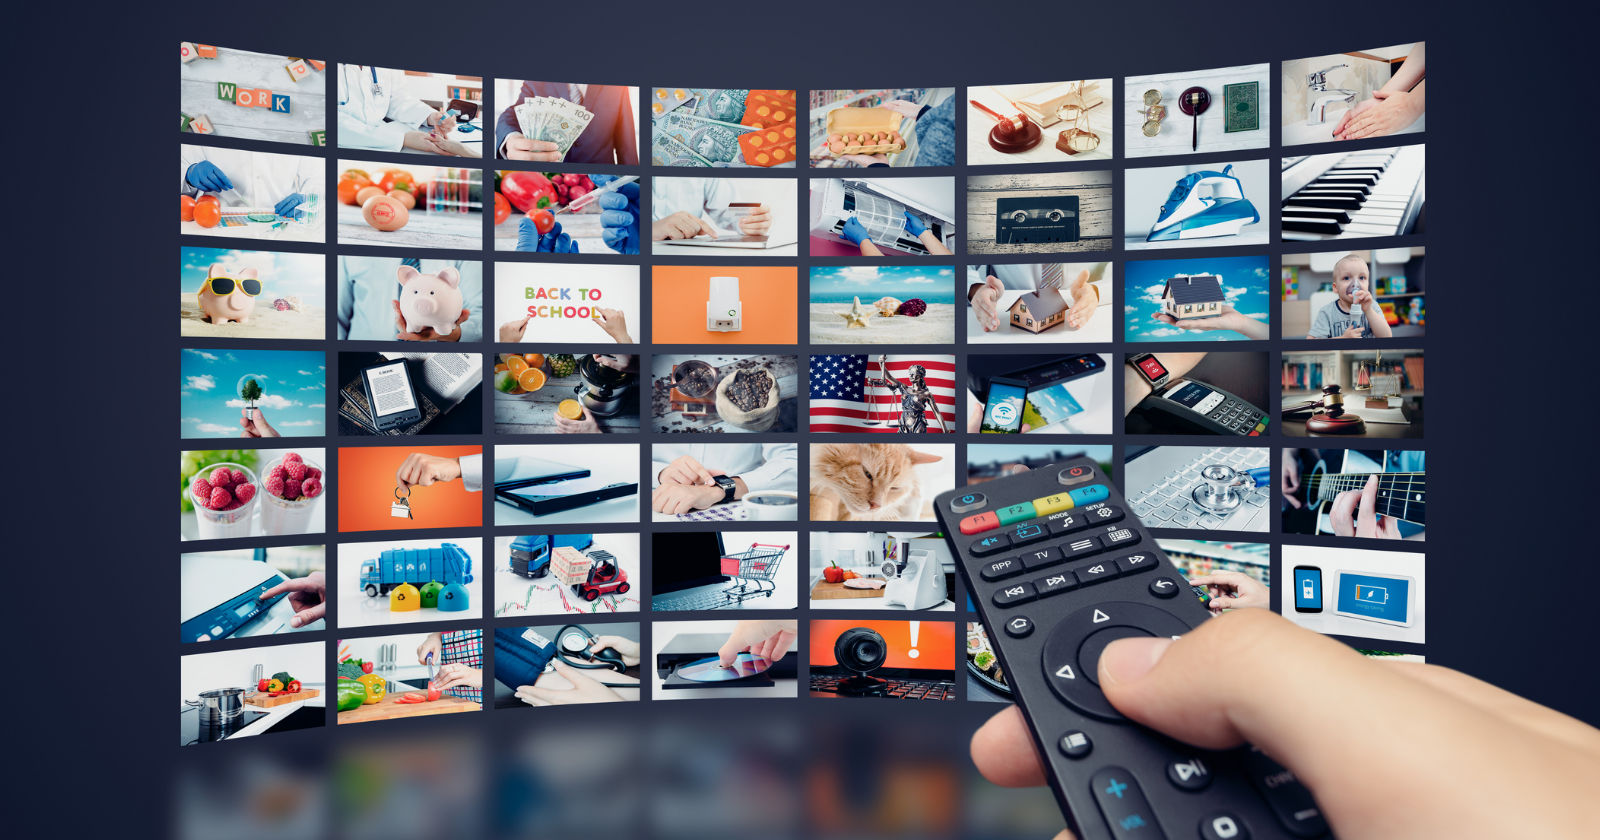 video on demand streaming software